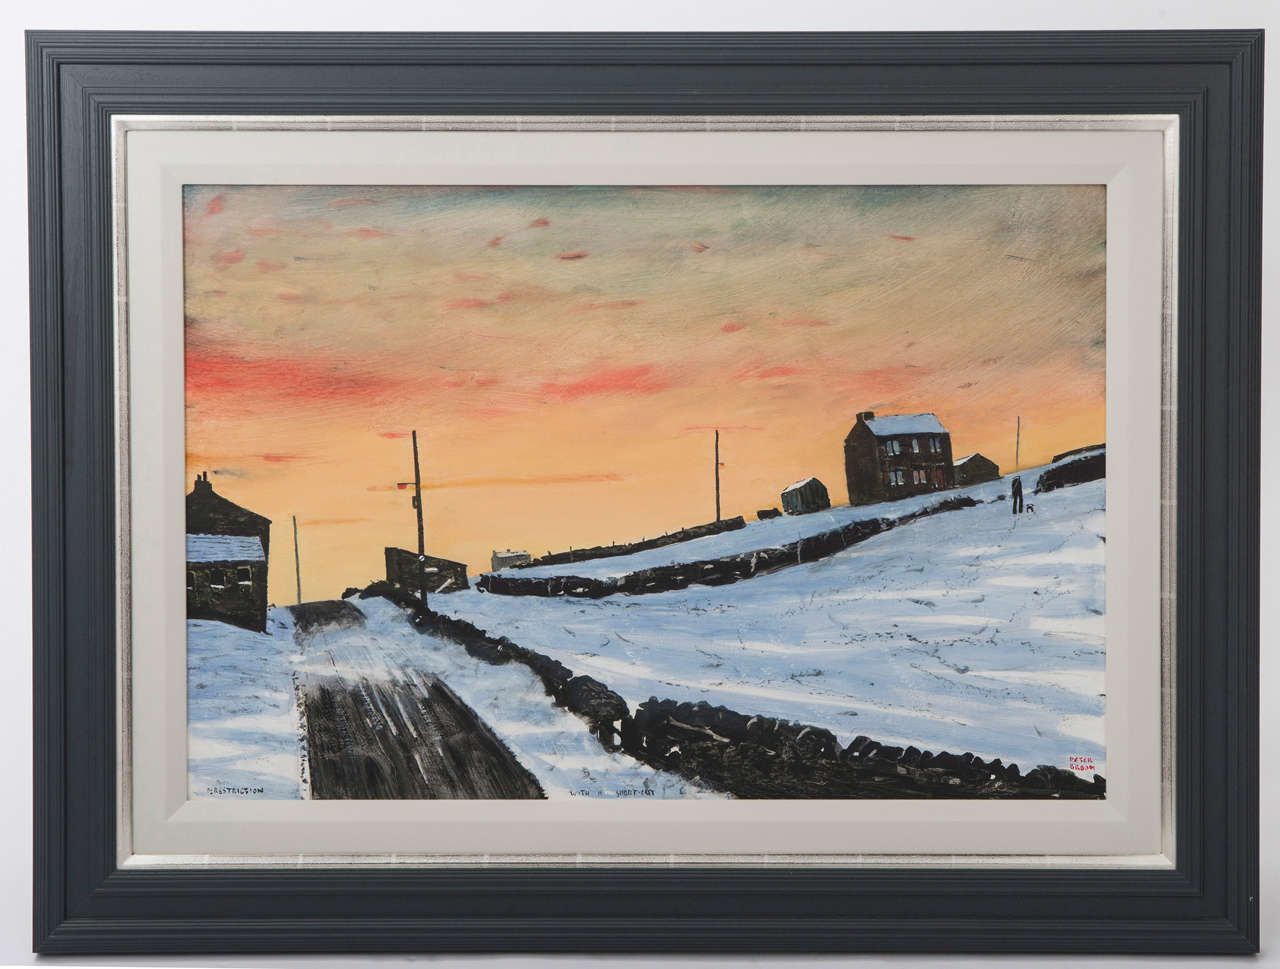 Peter Brook (1927-2009)
“De-Restriction with a short cut”
Oil on Board
England circa 1970.
51 cms x 76 cms